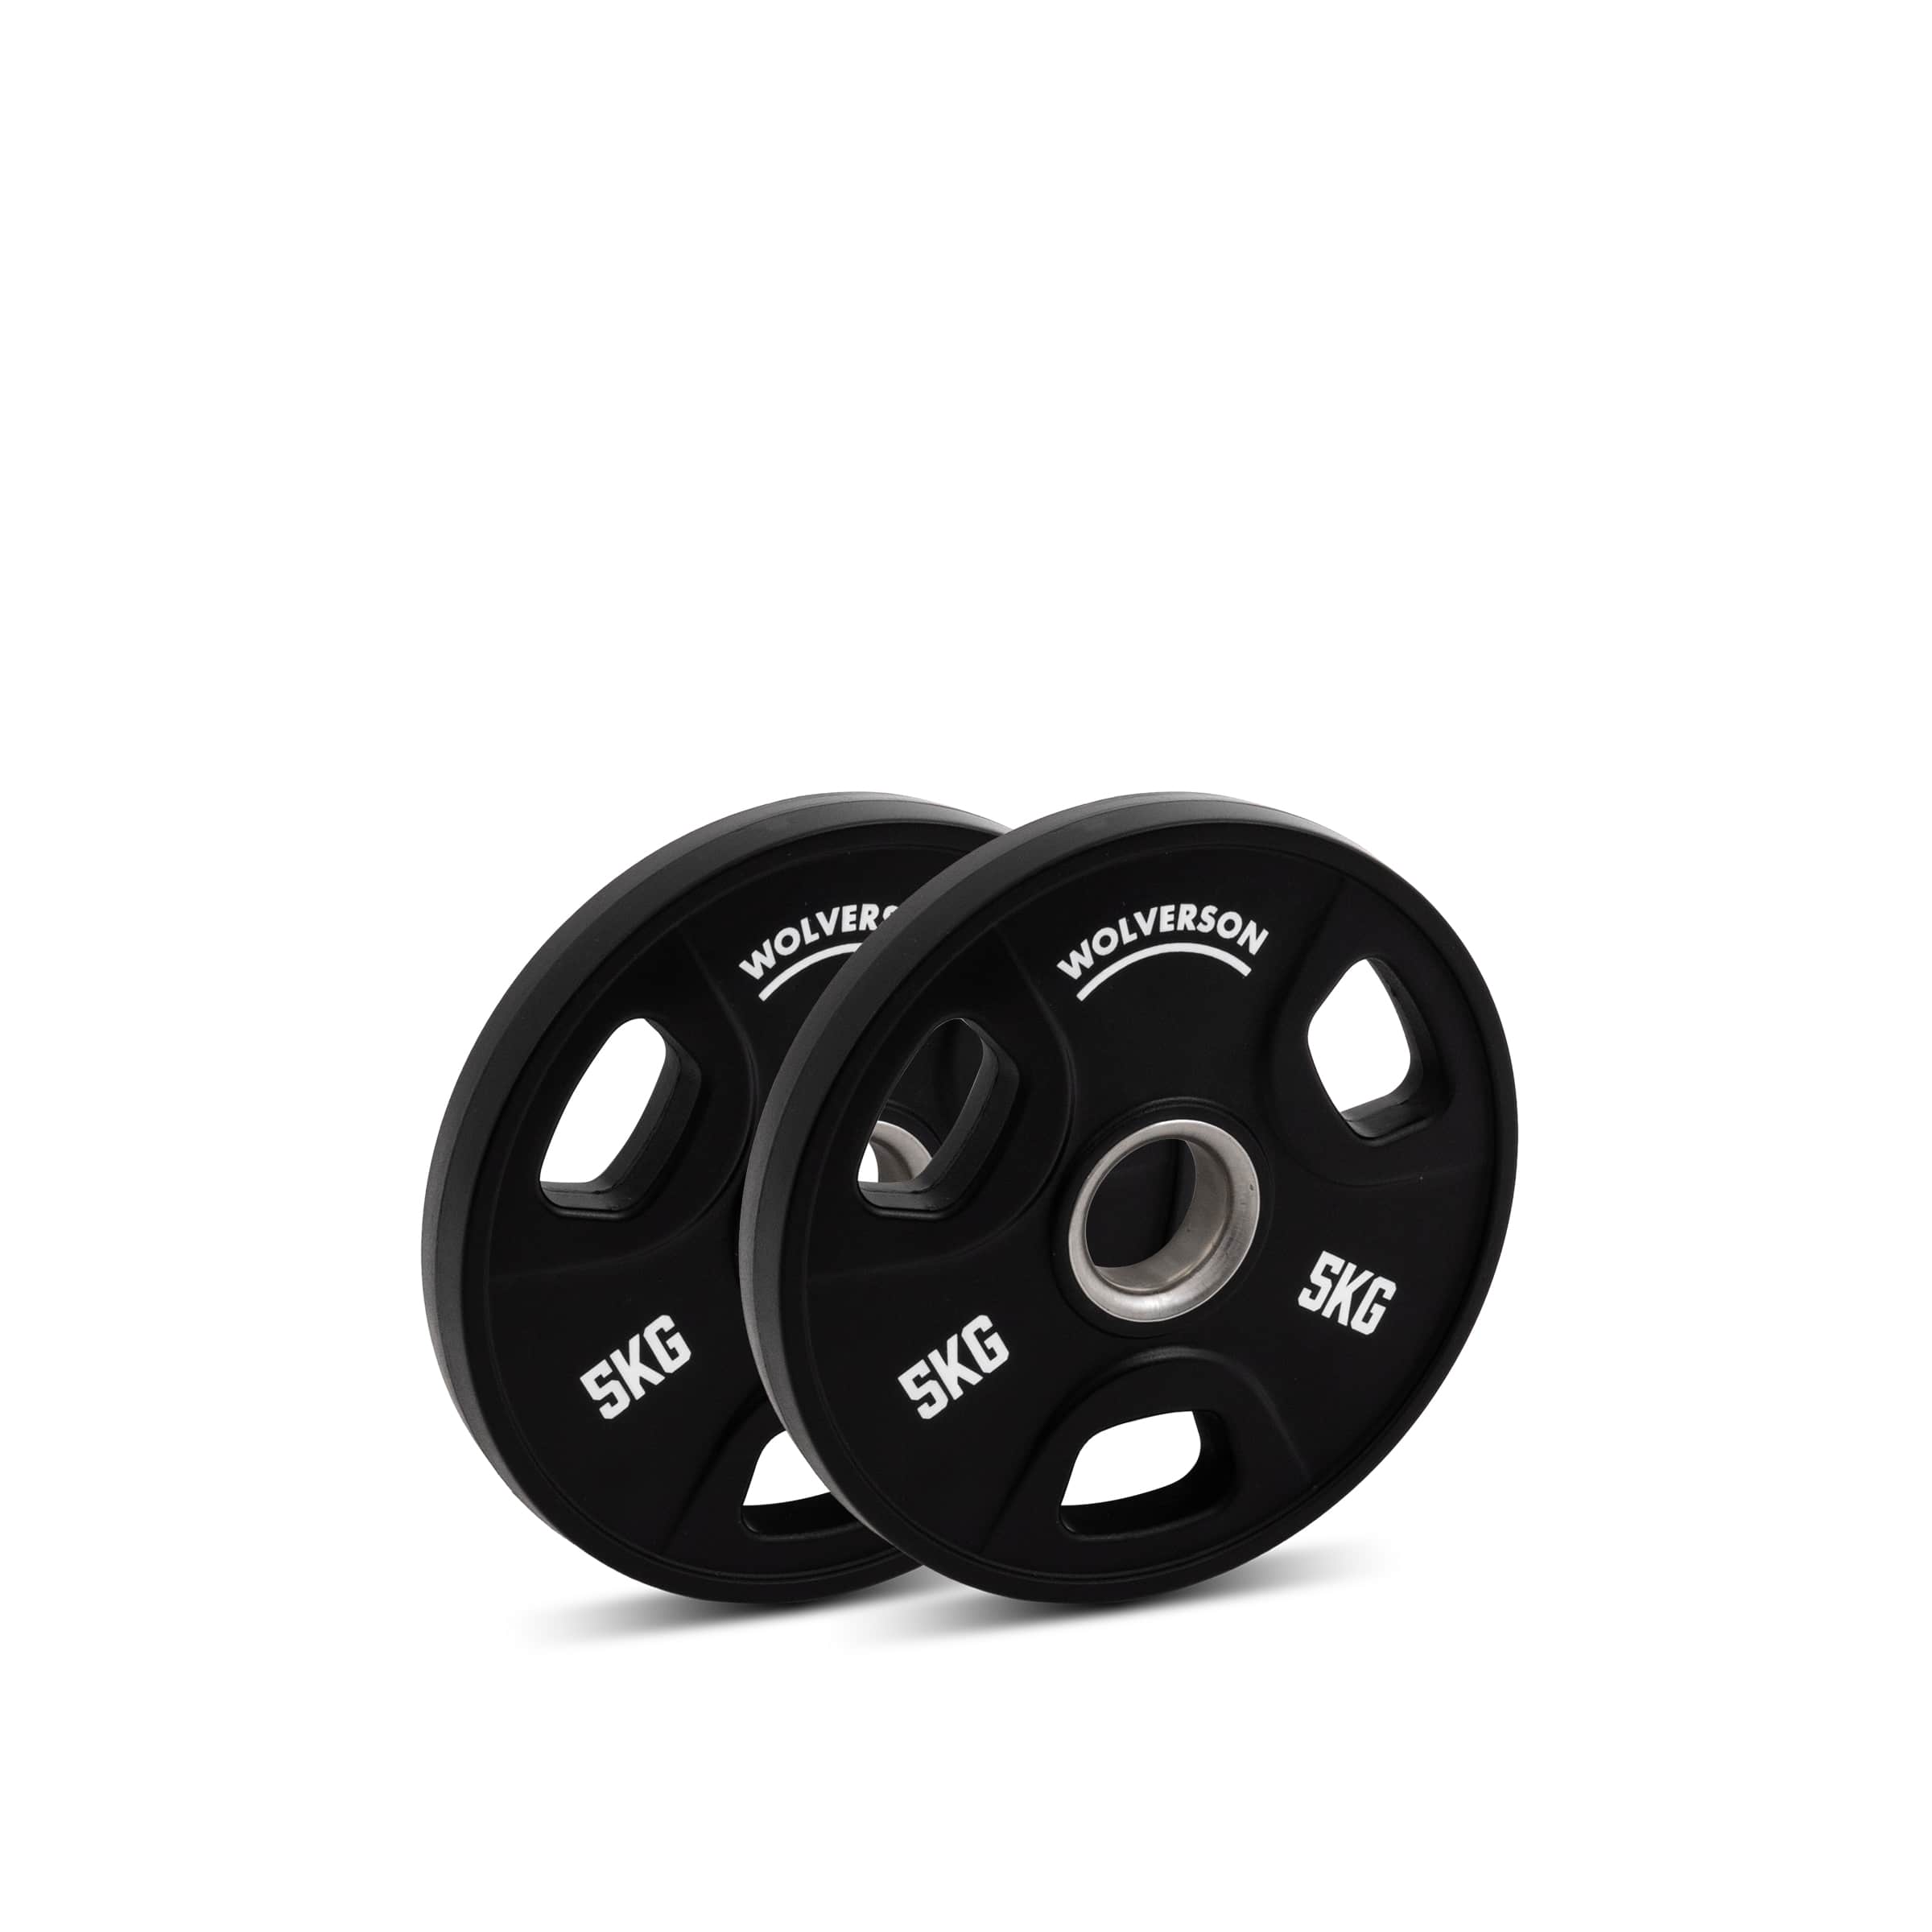 Wolverson Tri-Grip PU Olympic Weight Plates